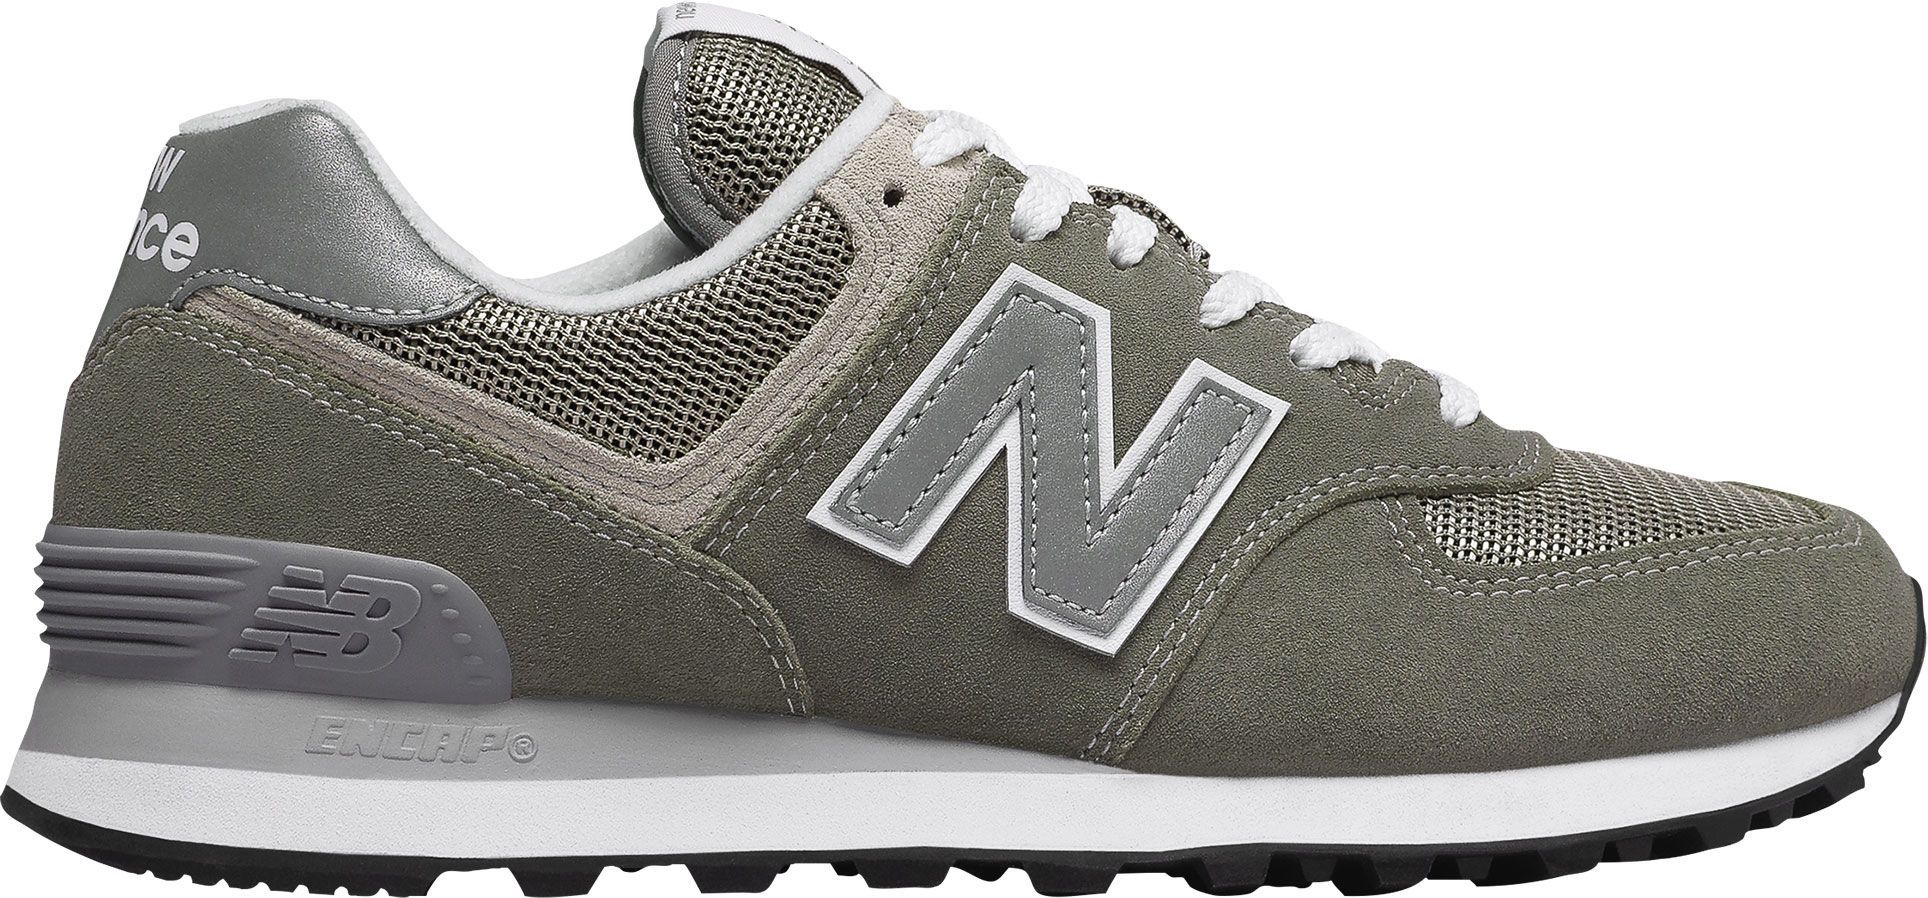 New Balance Women's 574 Shoes, Gray | Dick's Sporting Goods